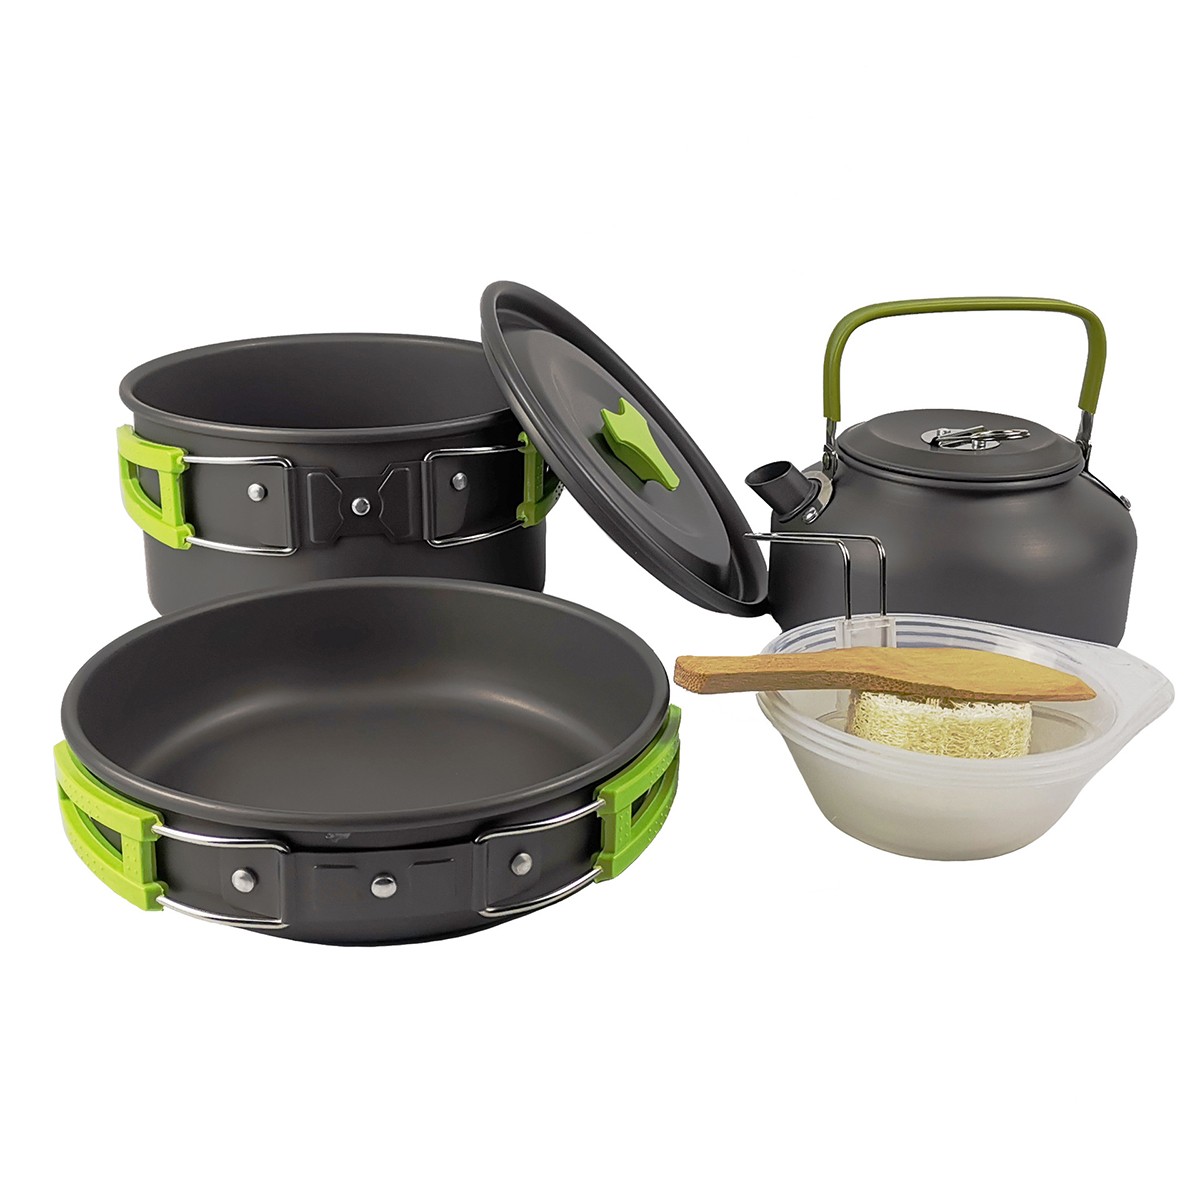 TAHAN 3-person Camper Cookset Best Camping Cookware in Town | PTT Outdoor